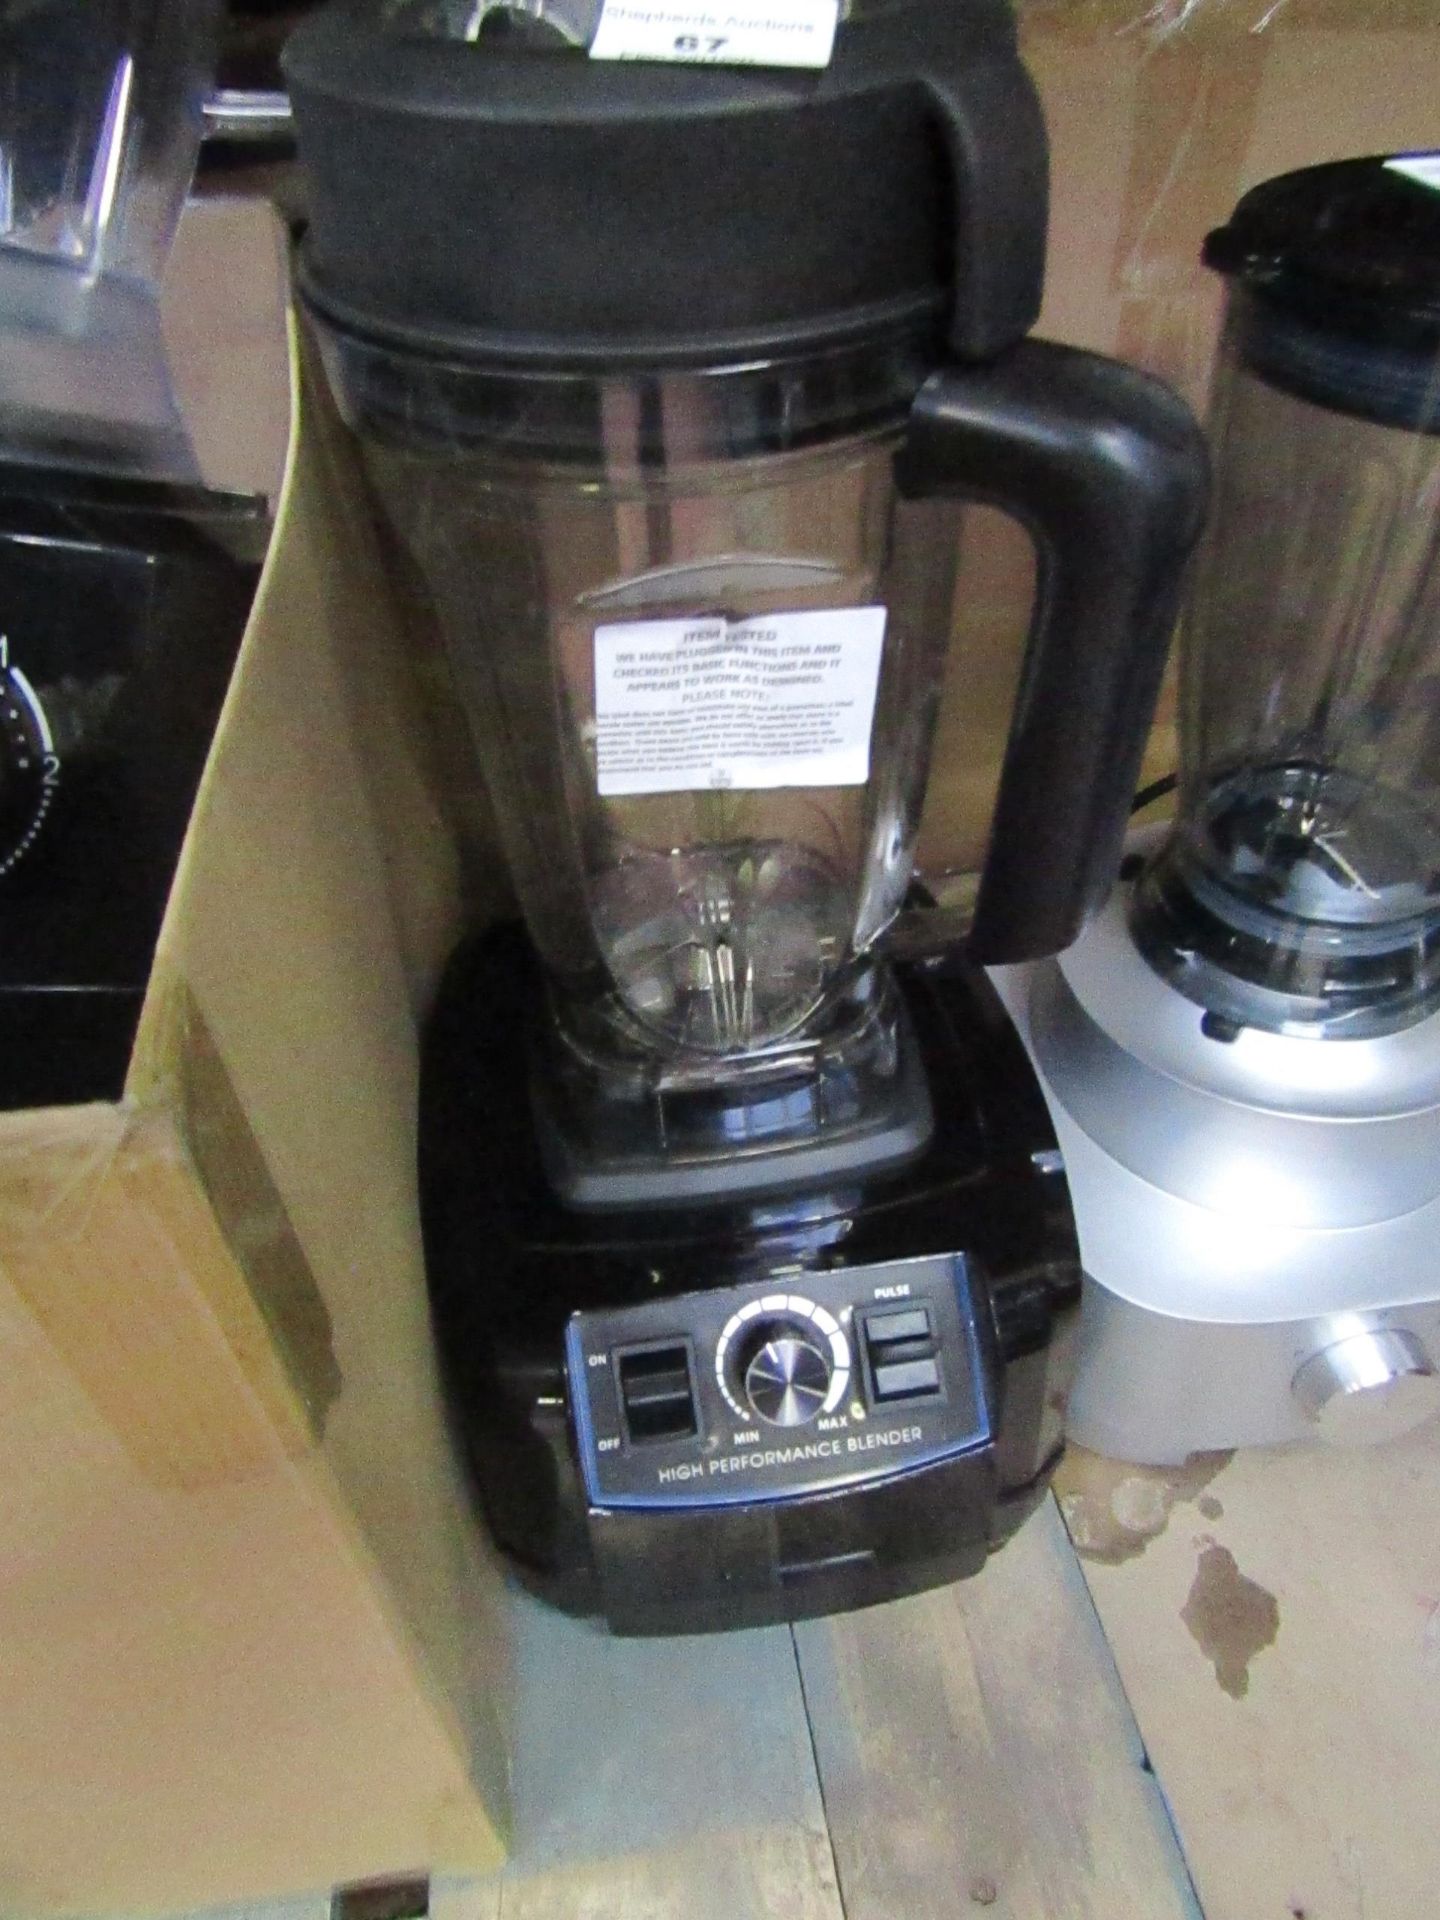 High Proformance blender - includes accessories - Tested working and boxed. - See image.